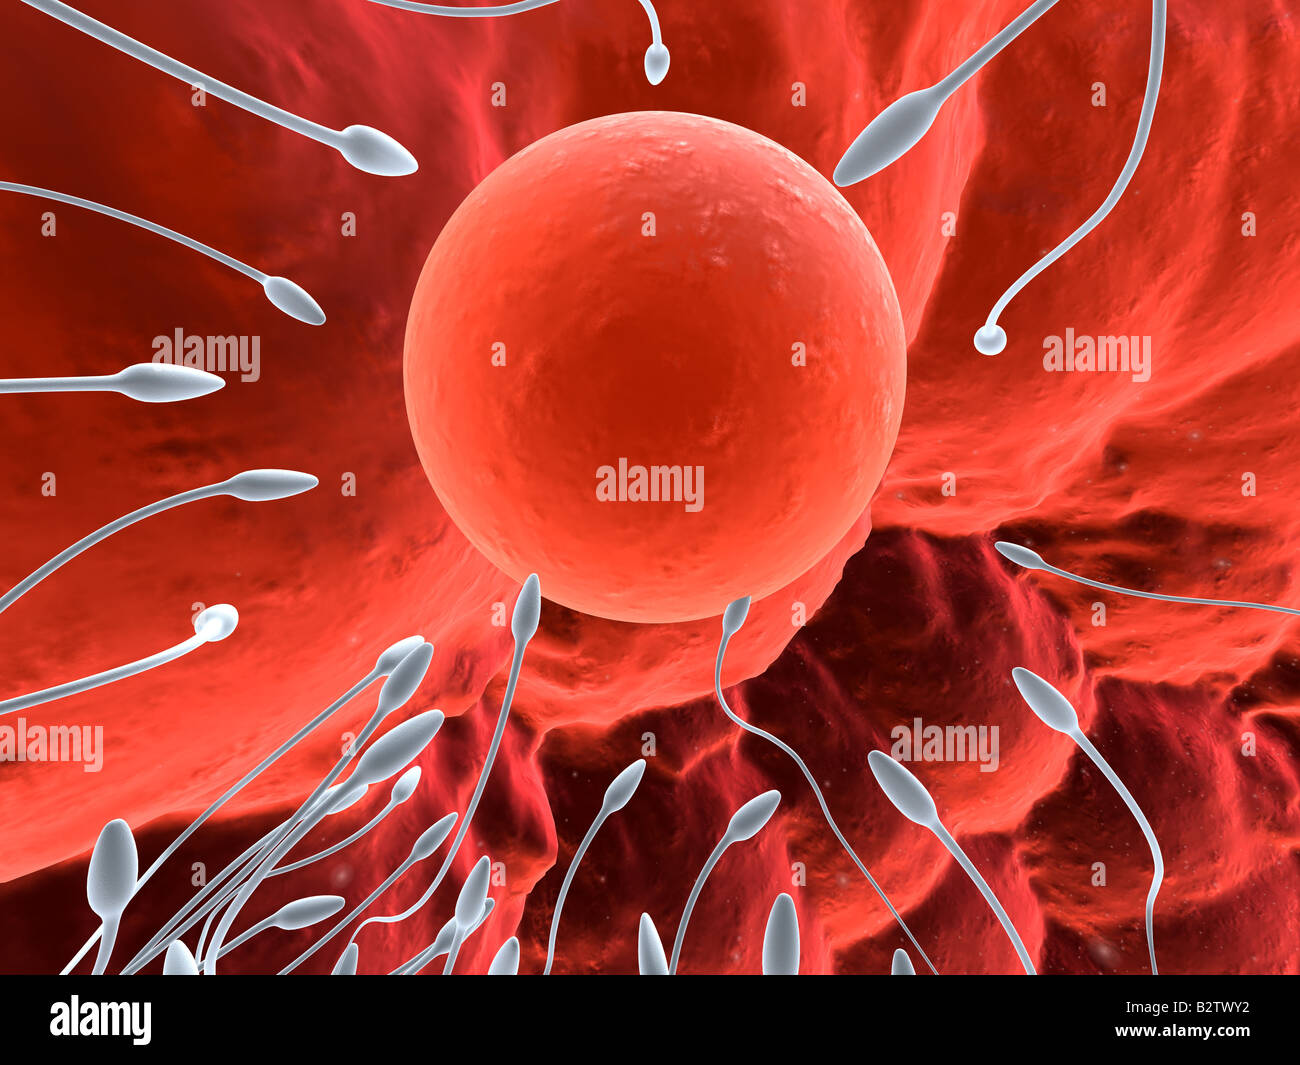 egg cell and sperms Stock Photo